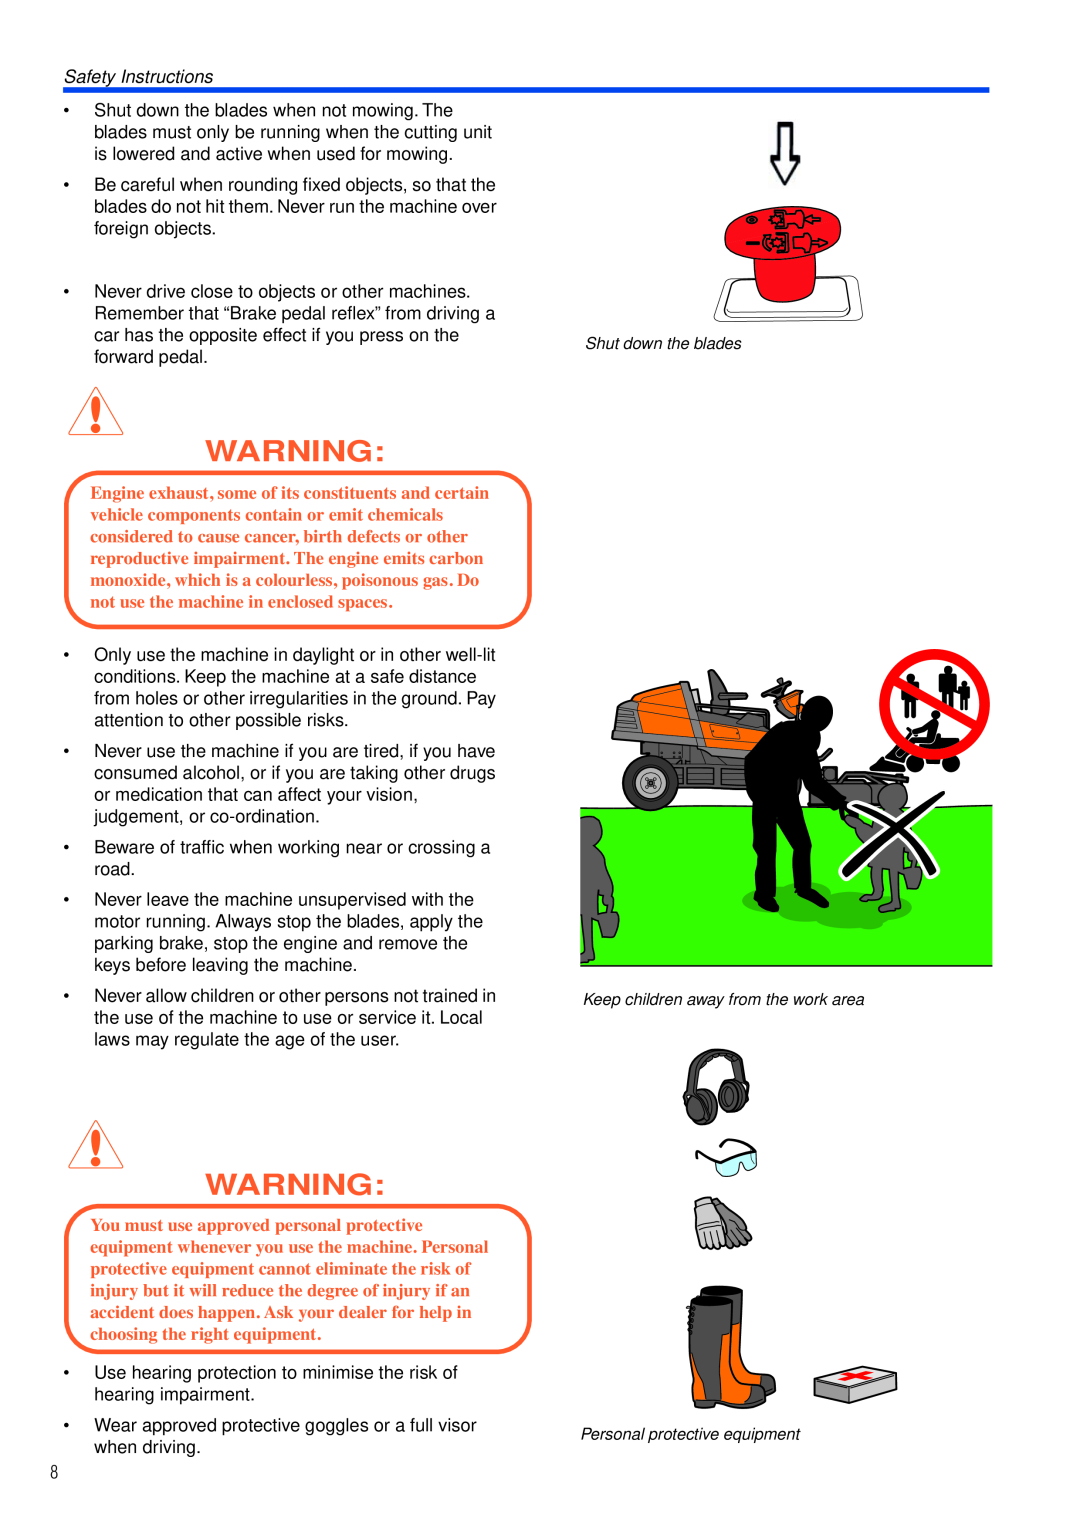 Husqvarna PT26 D manual Safety Instructions, foreign objects Never drive close to objects or other machines 